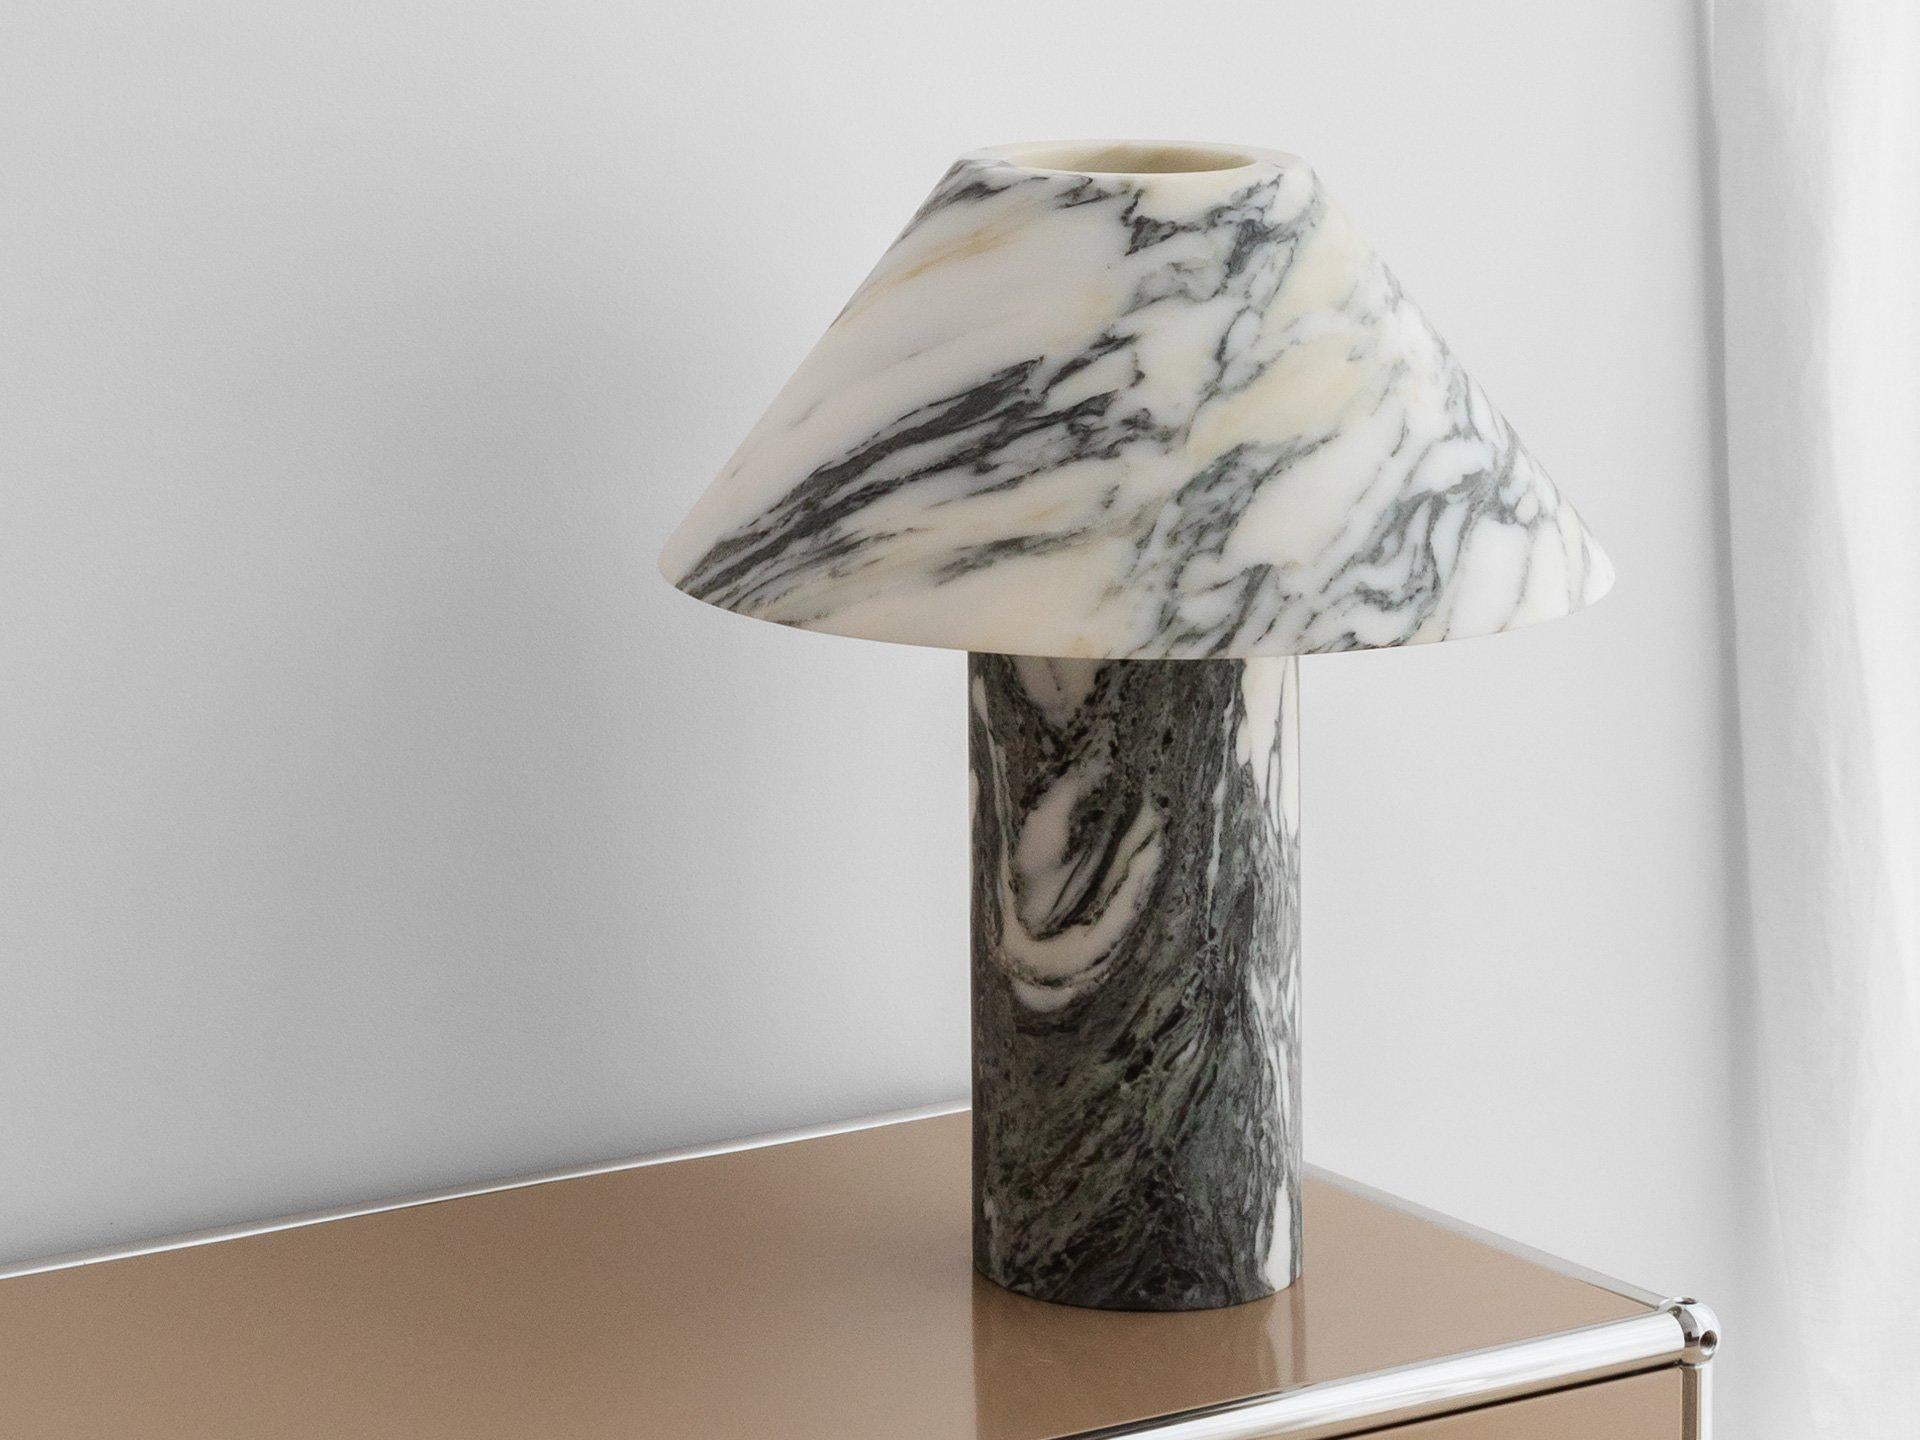 Pillar lamp in Arabescato marble by Henry Wilson
Dimensions: Surface Sconce are 40 x 12 x 35 cm
Materials: Arabescato marble

Pillar Lamp is hewn from two pieces of solid Arabescato Marble. It is heavy and will require care in transport and a sturdy